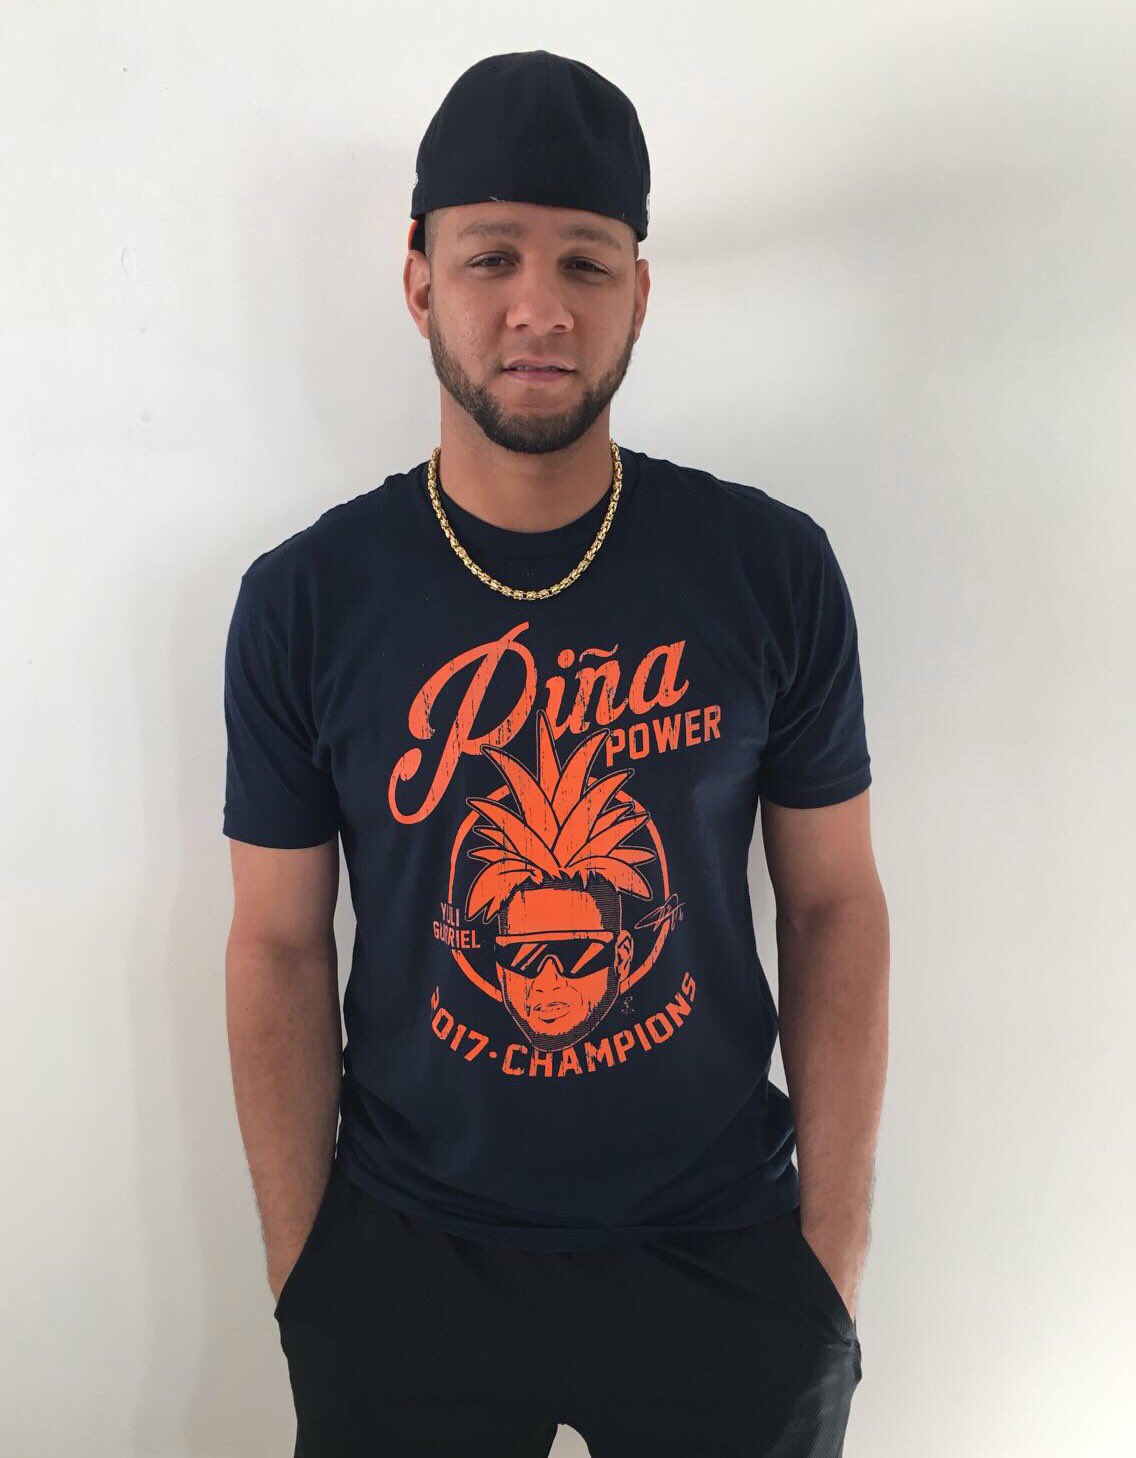 Yulieski Gurriel on X: Piña tee for #Houston!🍍🎁 @astros @LosAstros fans  official #PiñaPower 🍍 '17 Champs tee only available for 2 weeks from  @Represent:   / X